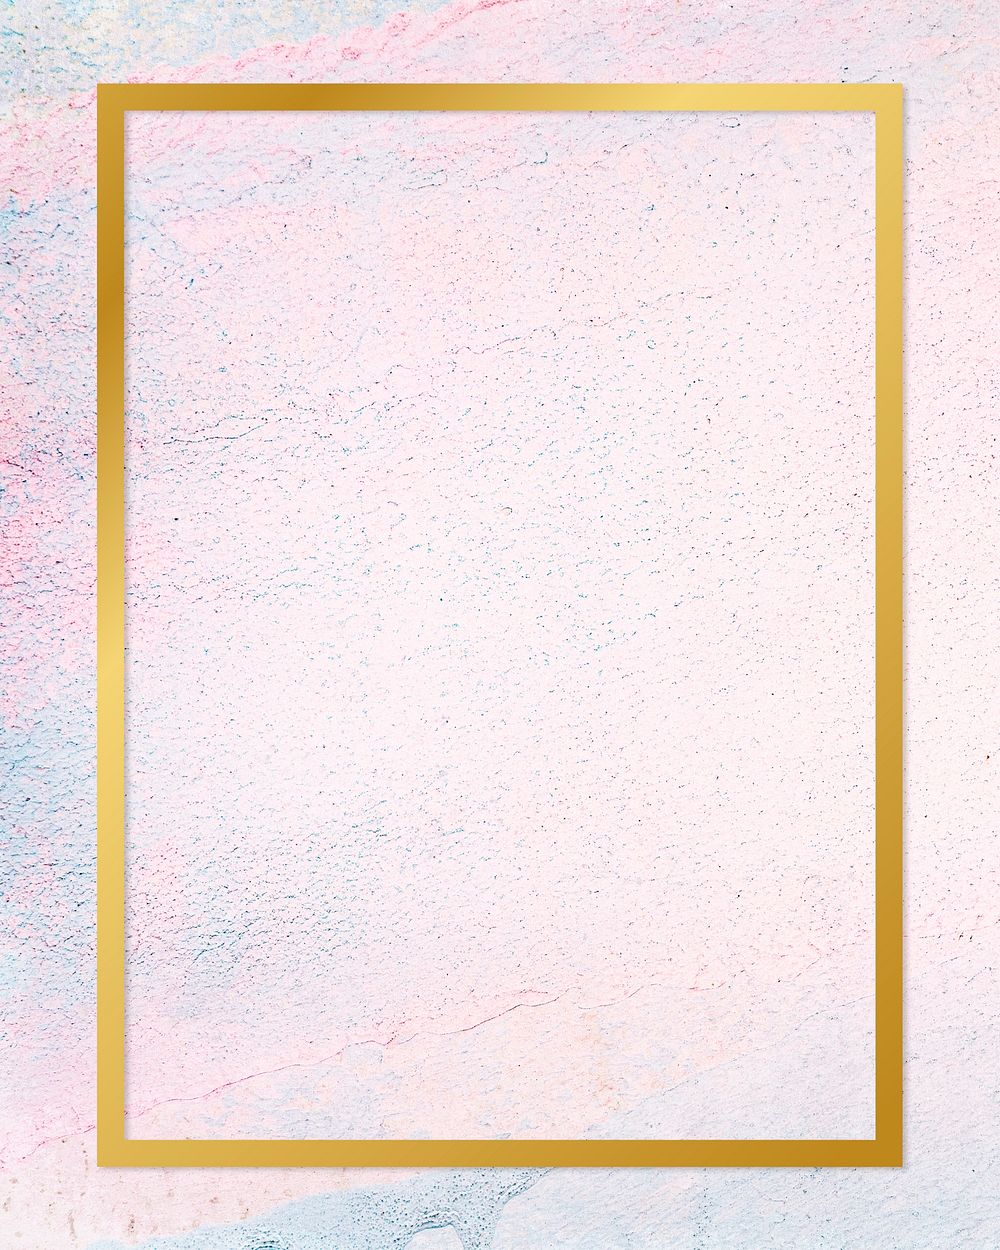 Gold rectangle frame on a pastel concrete background